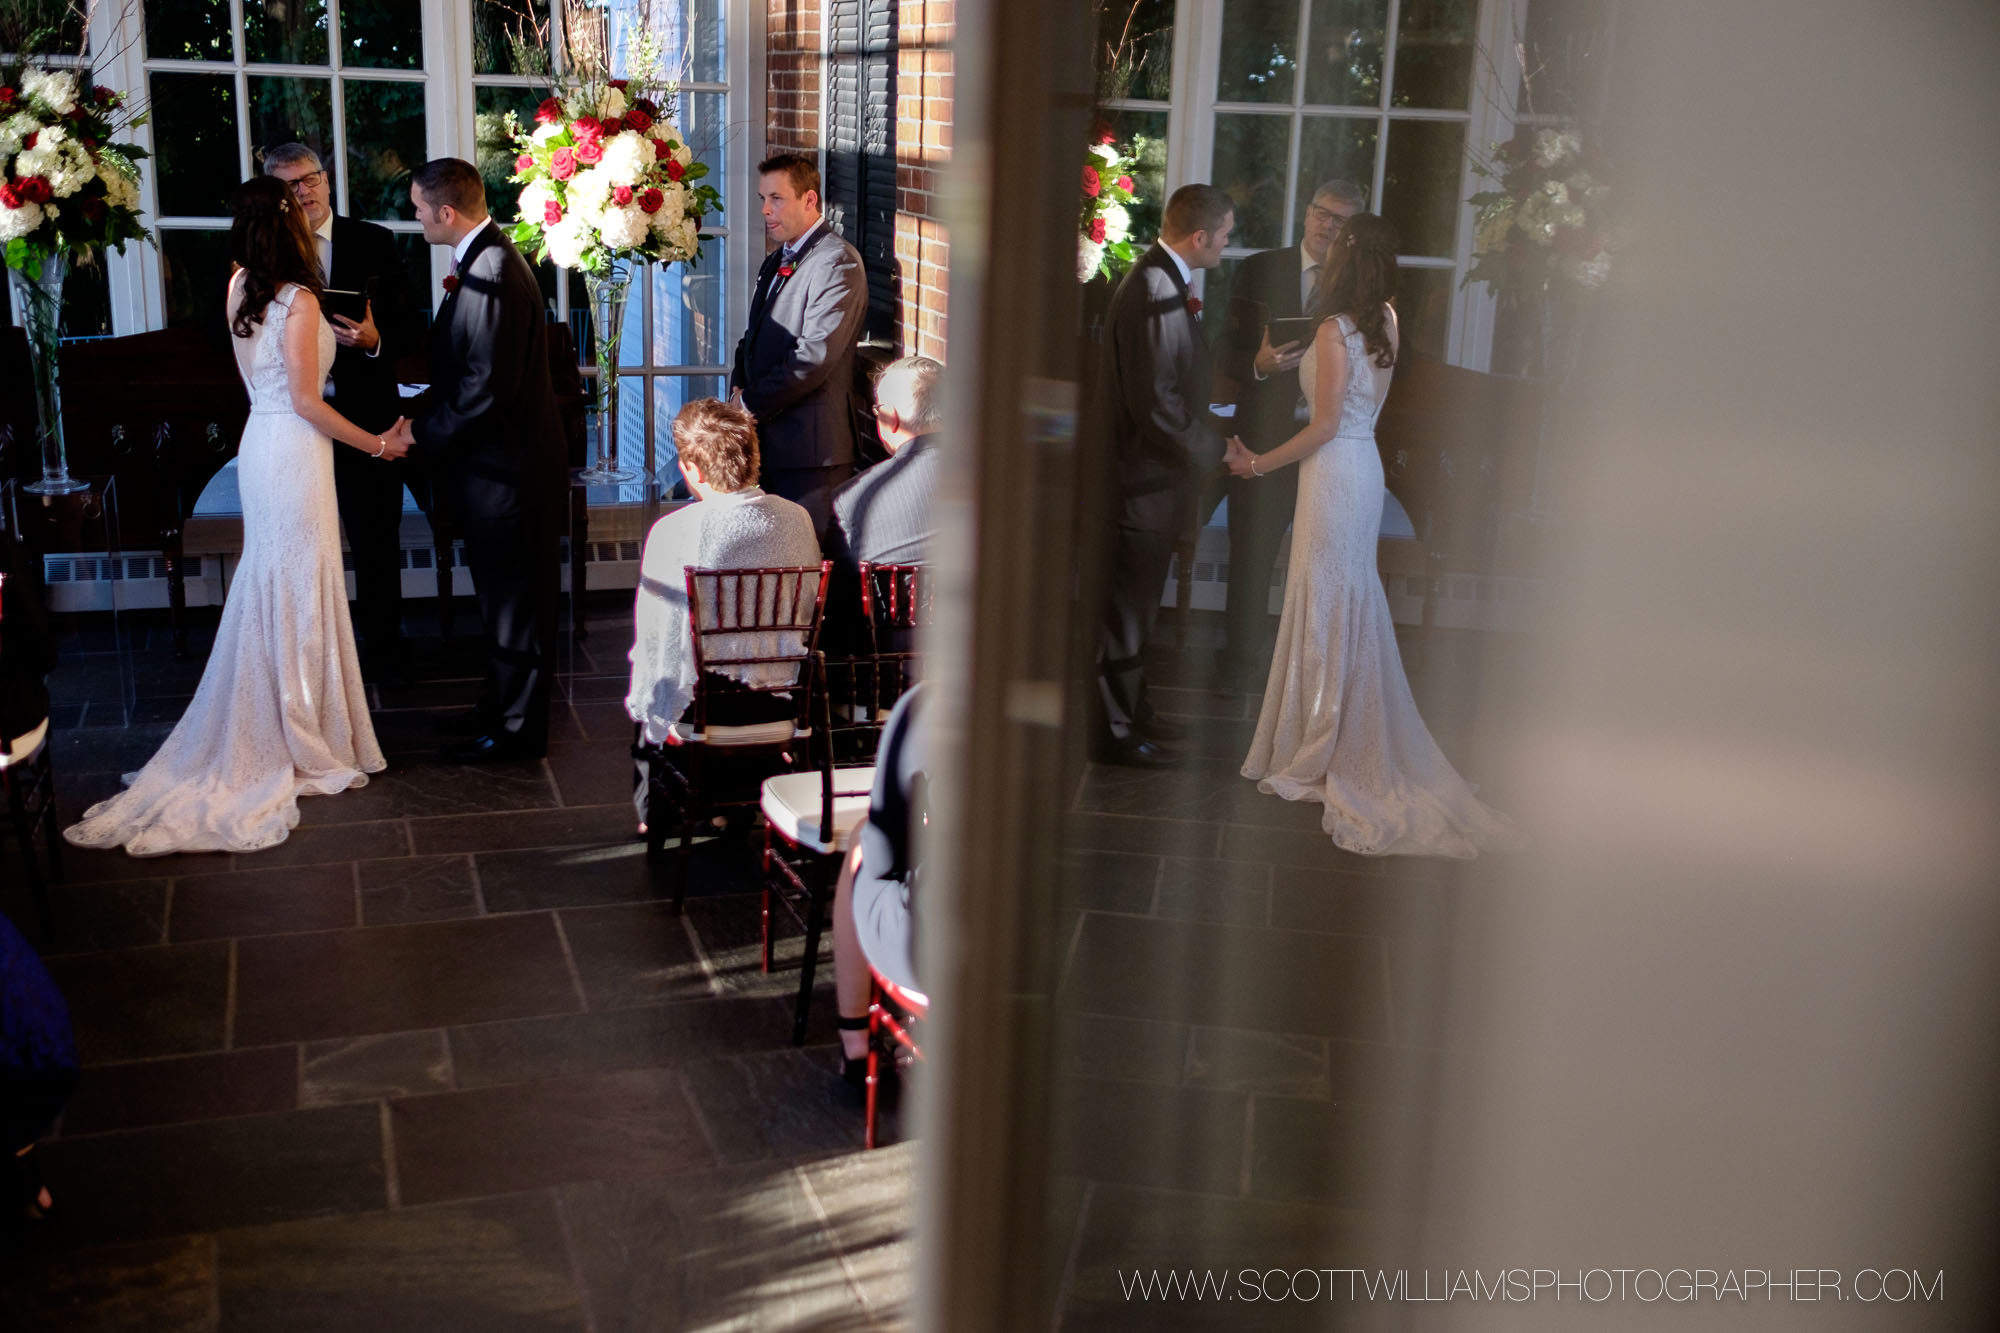  A wedding photograph from an intimate fall wedding ceremony at Langdon Hall in Cambridge, Ontario.&nbsp; 